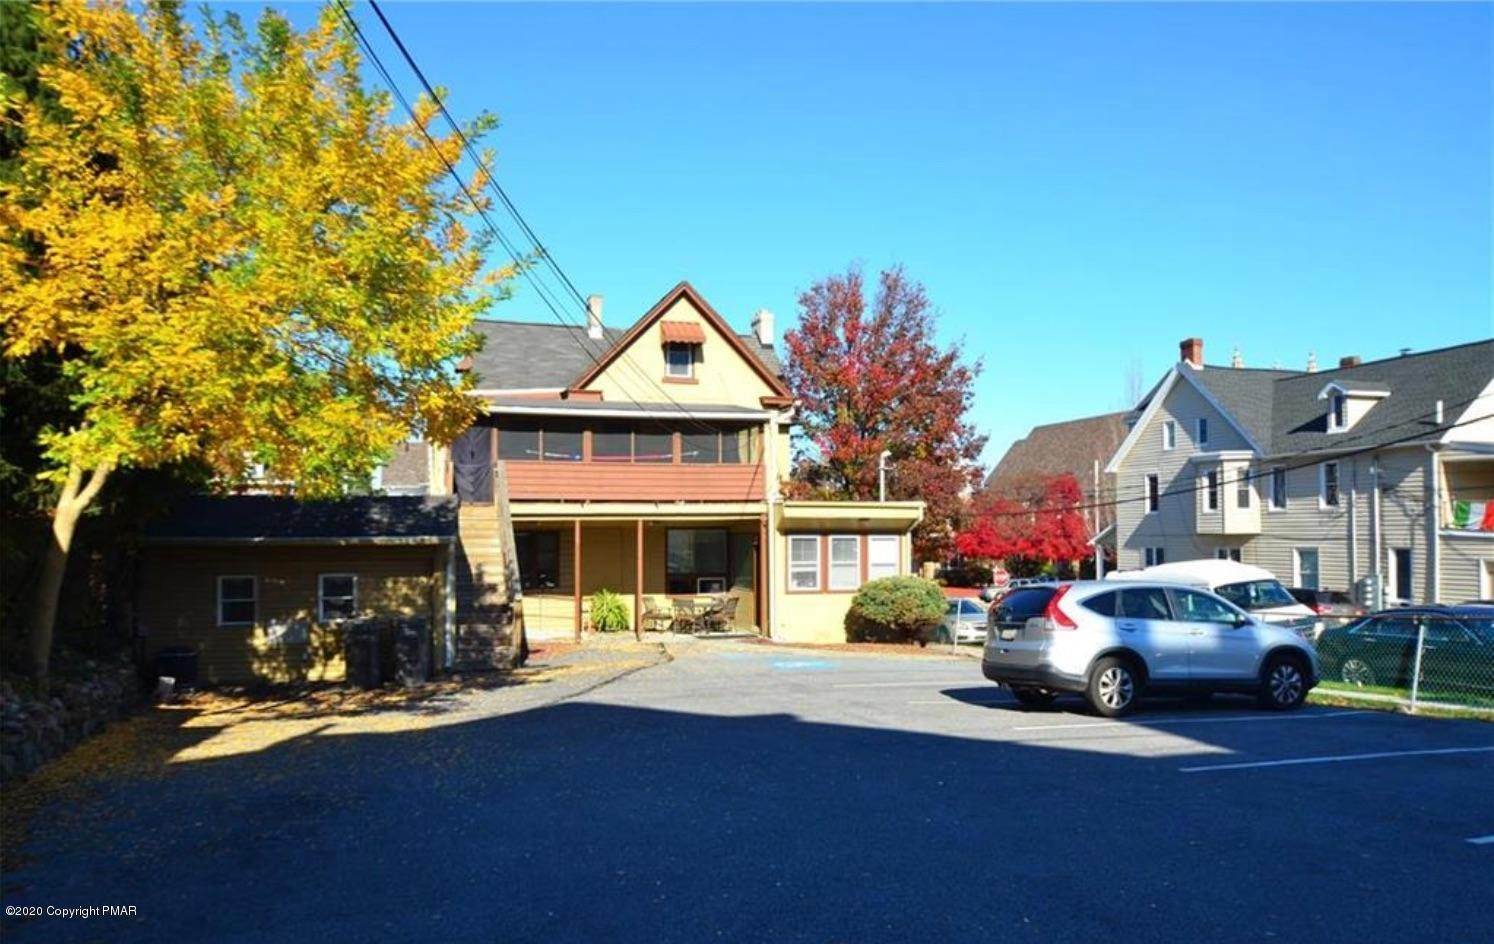 25. Commercial for Sale at 801 W Broad St Bethlehem, Pennsylvania 18018 United States